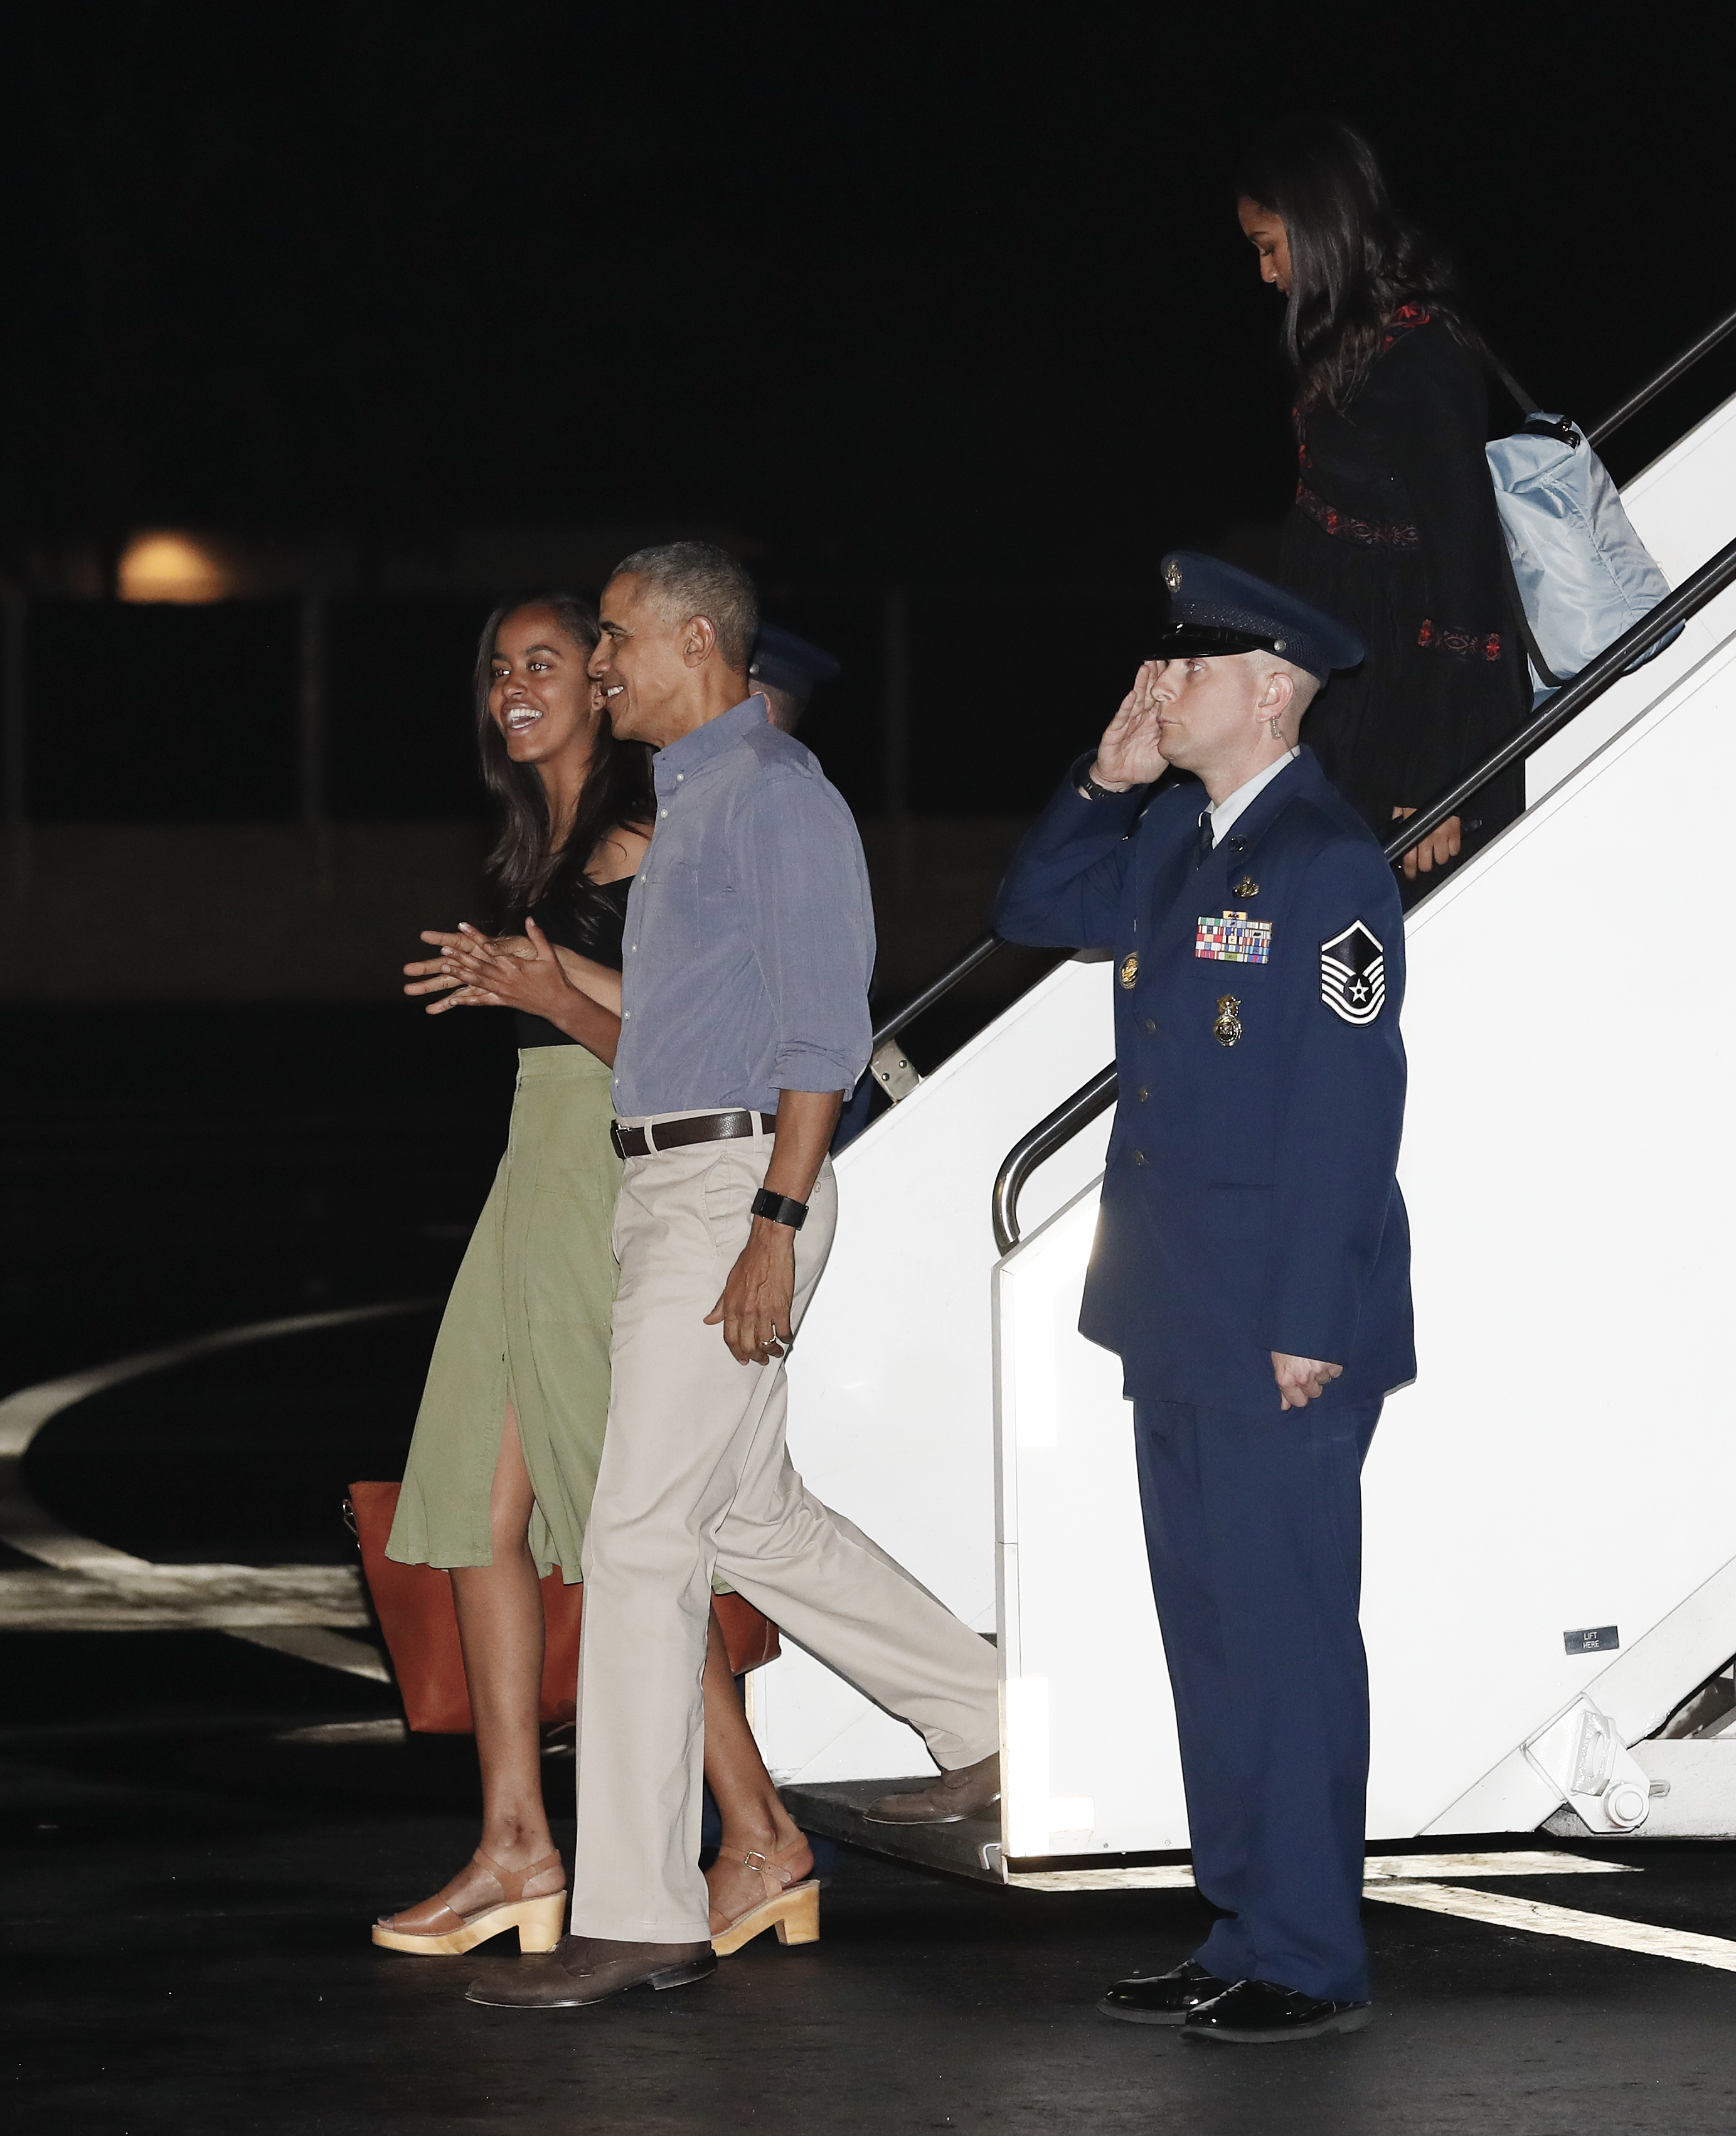 U.S. President Barack Obama and his daughters Malia, left, and Sasha arrive on Air Force One, Friday, Dec. 16, 2016, at Joint Base Pearl Harbor-Hickam, adjacent to Honolulu, Hawaii, for their annual family vacation on the island of Oahu. (AP Photo/Carolyn Kaster)